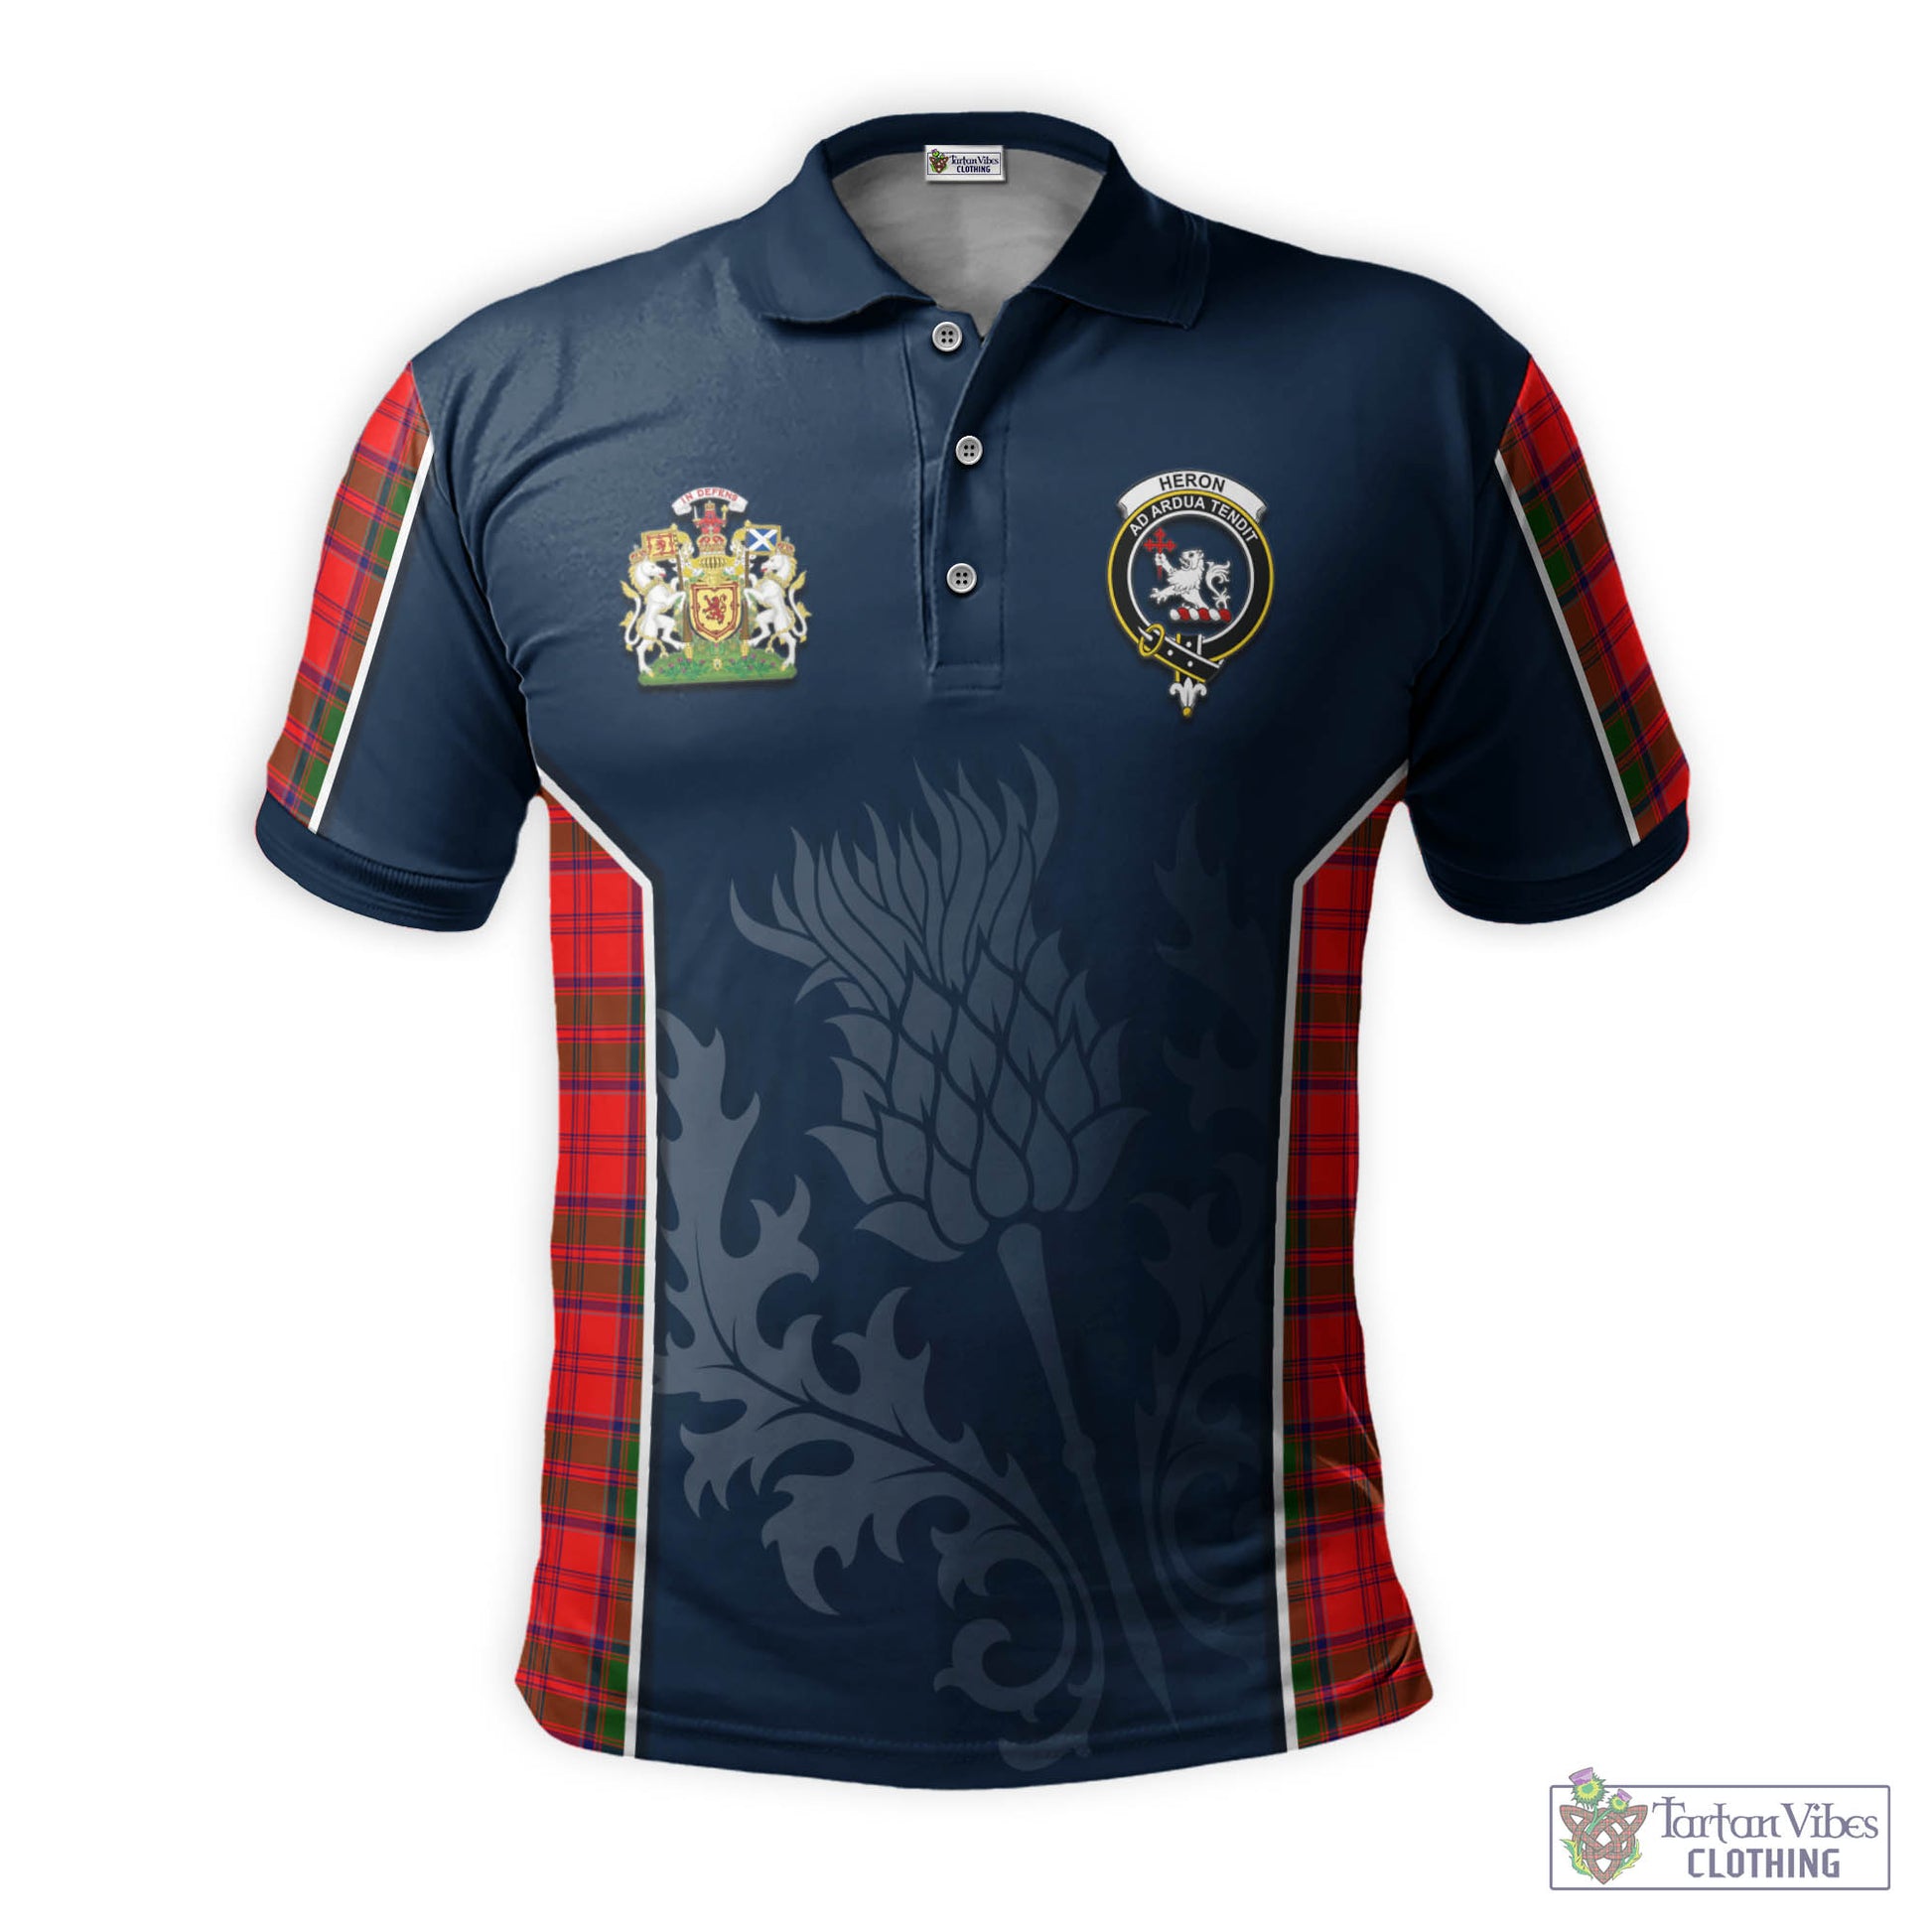 Tartan Vibes Clothing Heron Tartan Men's Polo Shirt with Family Crest and Scottish Thistle Vibes Sport Style